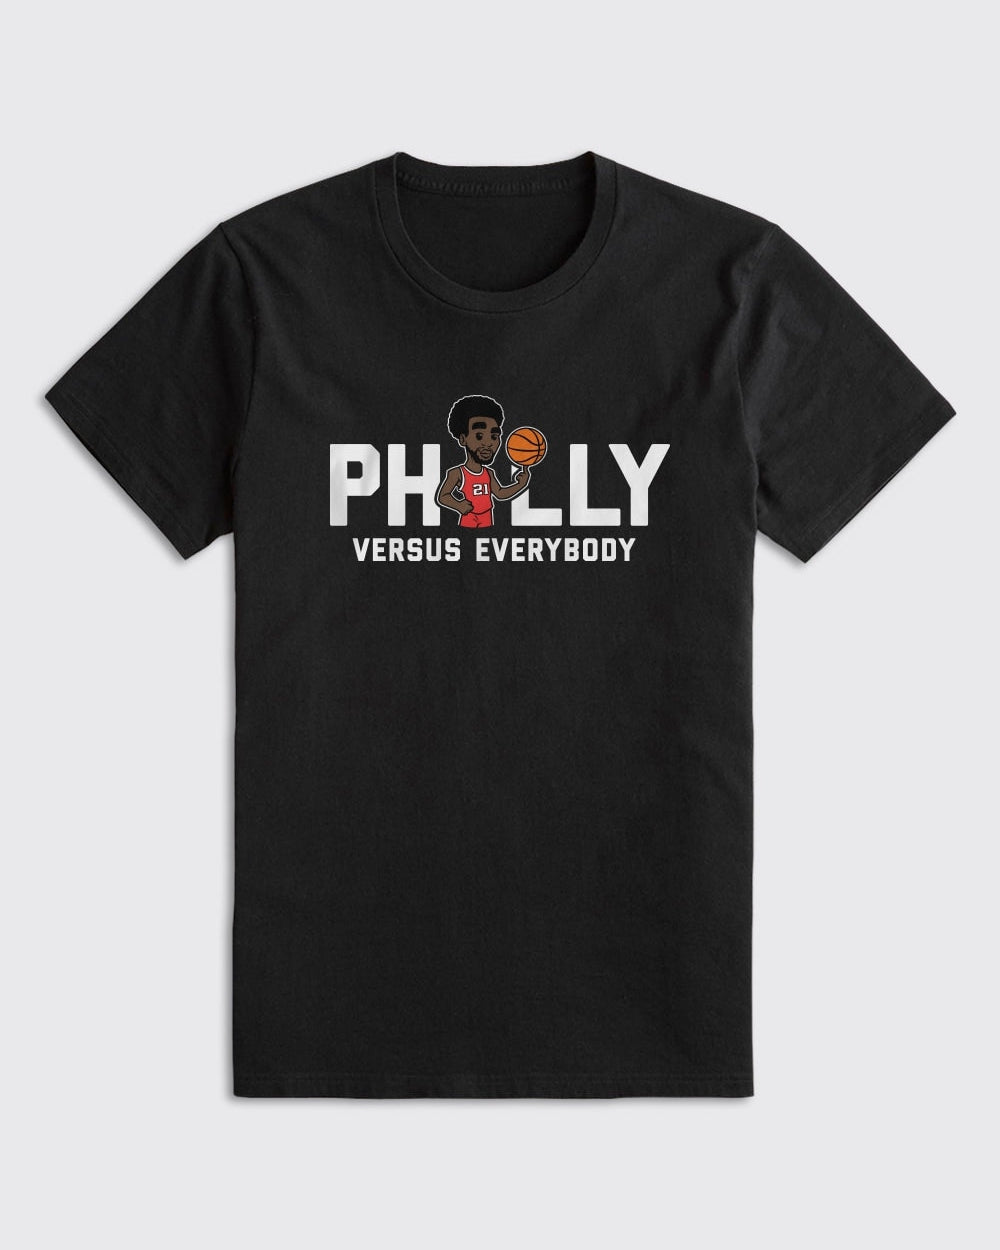 Embiid Philly vs Everybody Shirt-Philly Sports Shirts